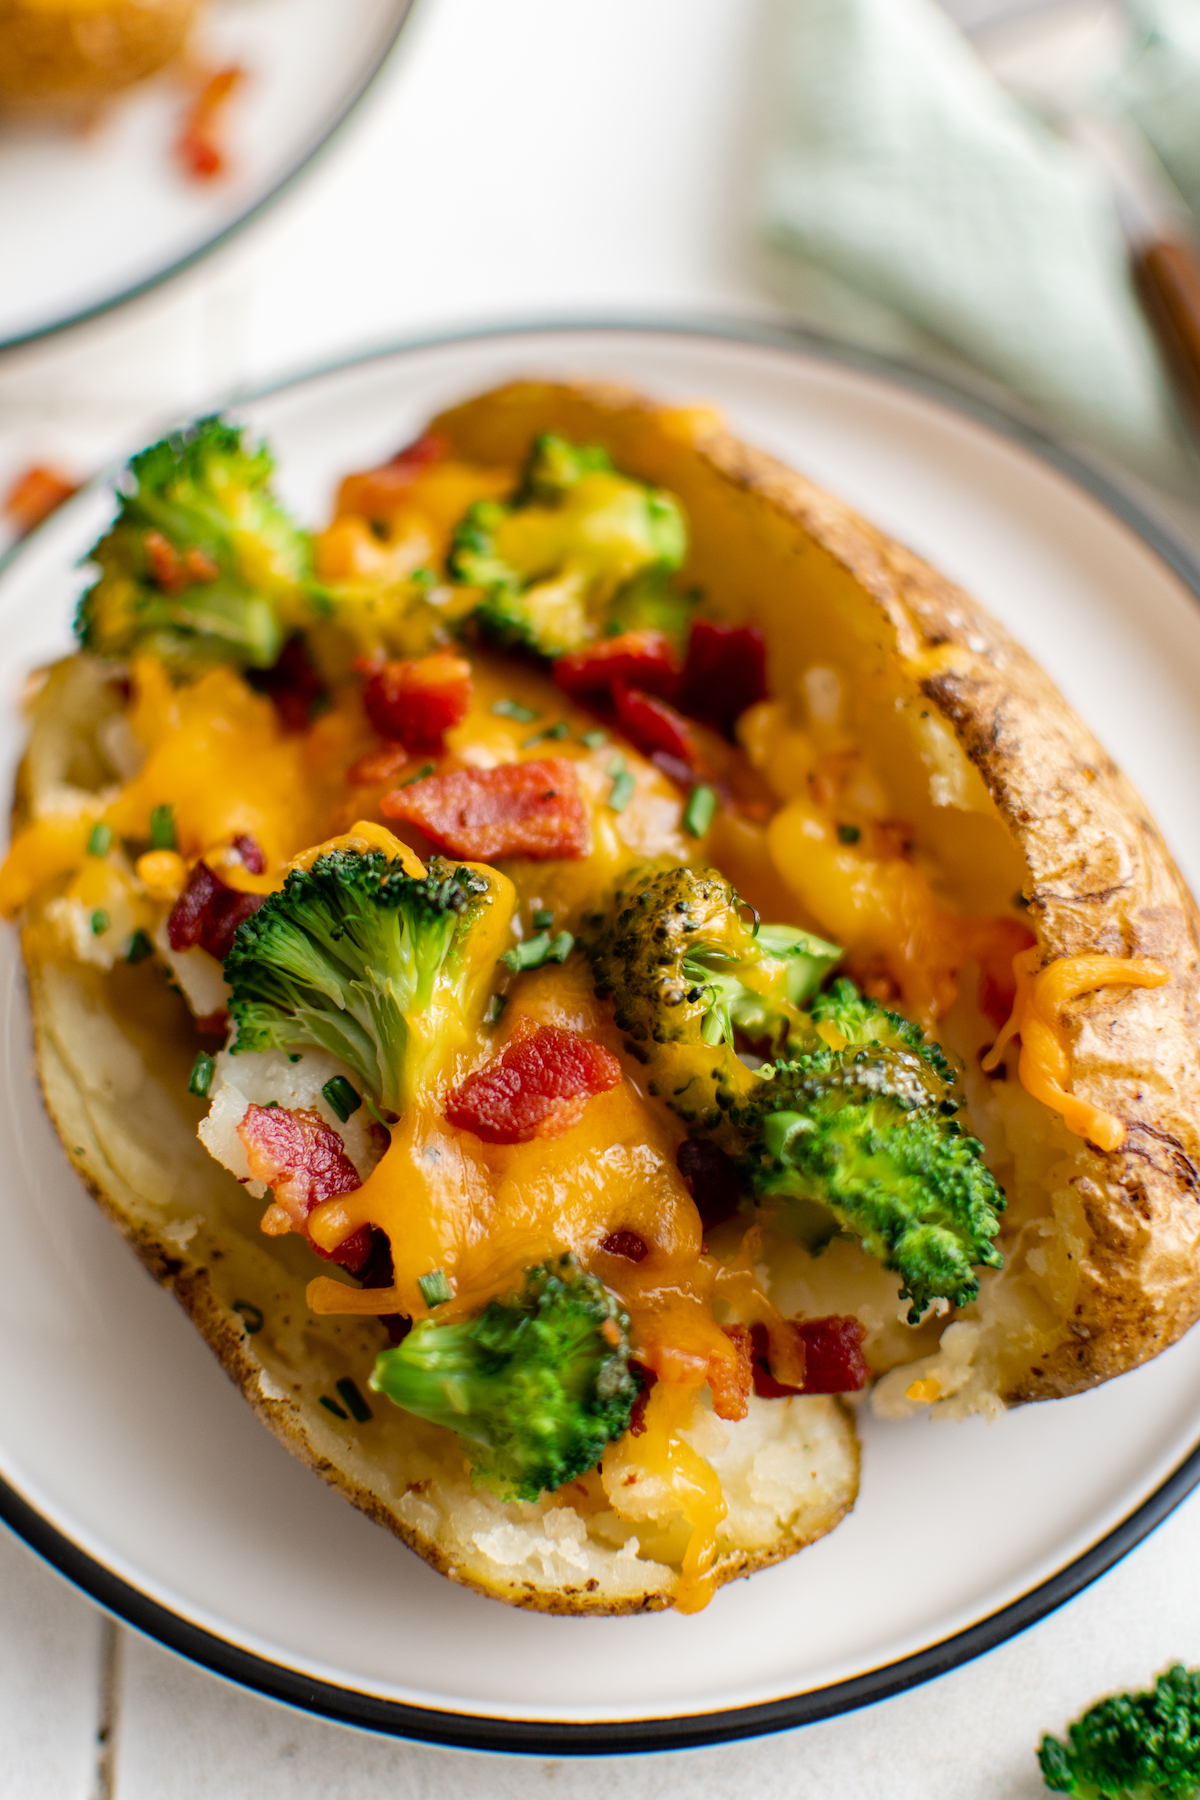 A single baked potato stuffed with broccoli and other toppings.